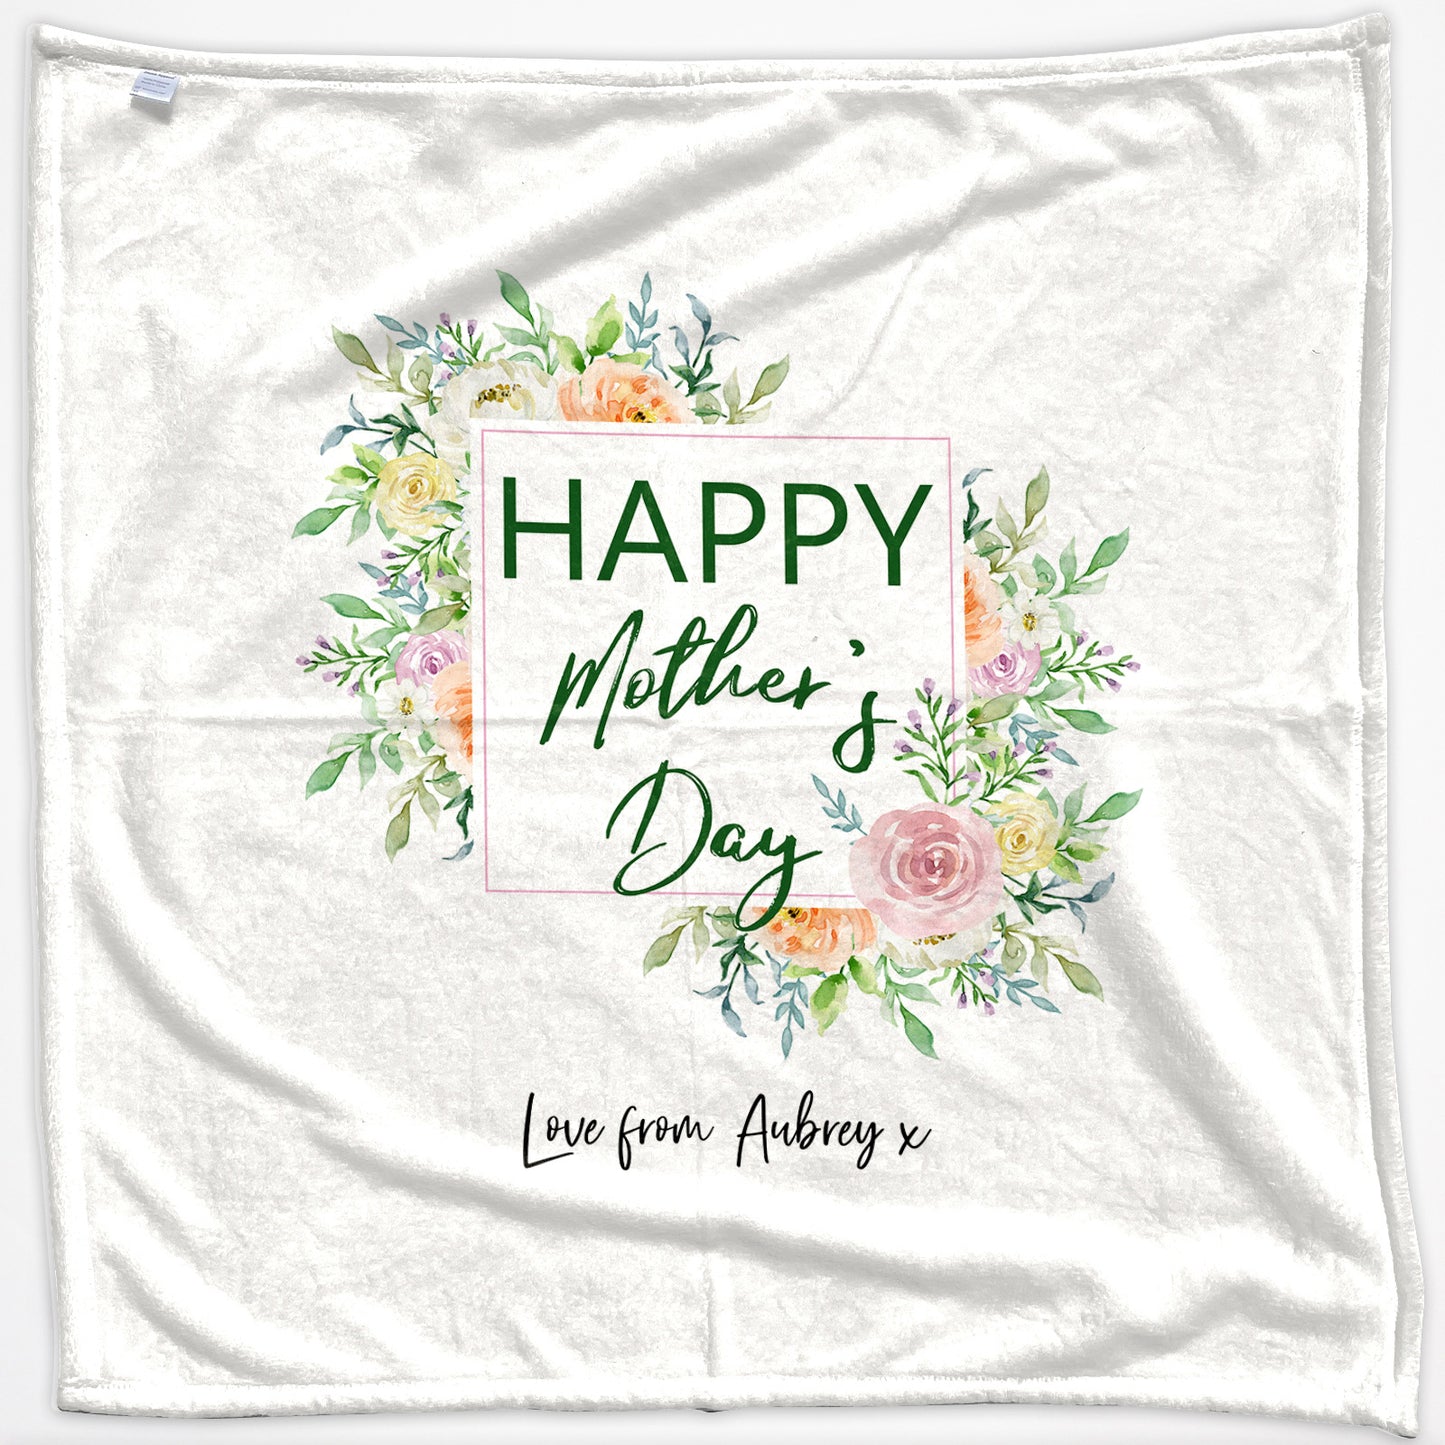 Personalised Blanket with Stylish Text and Floral Mother’s Day Message